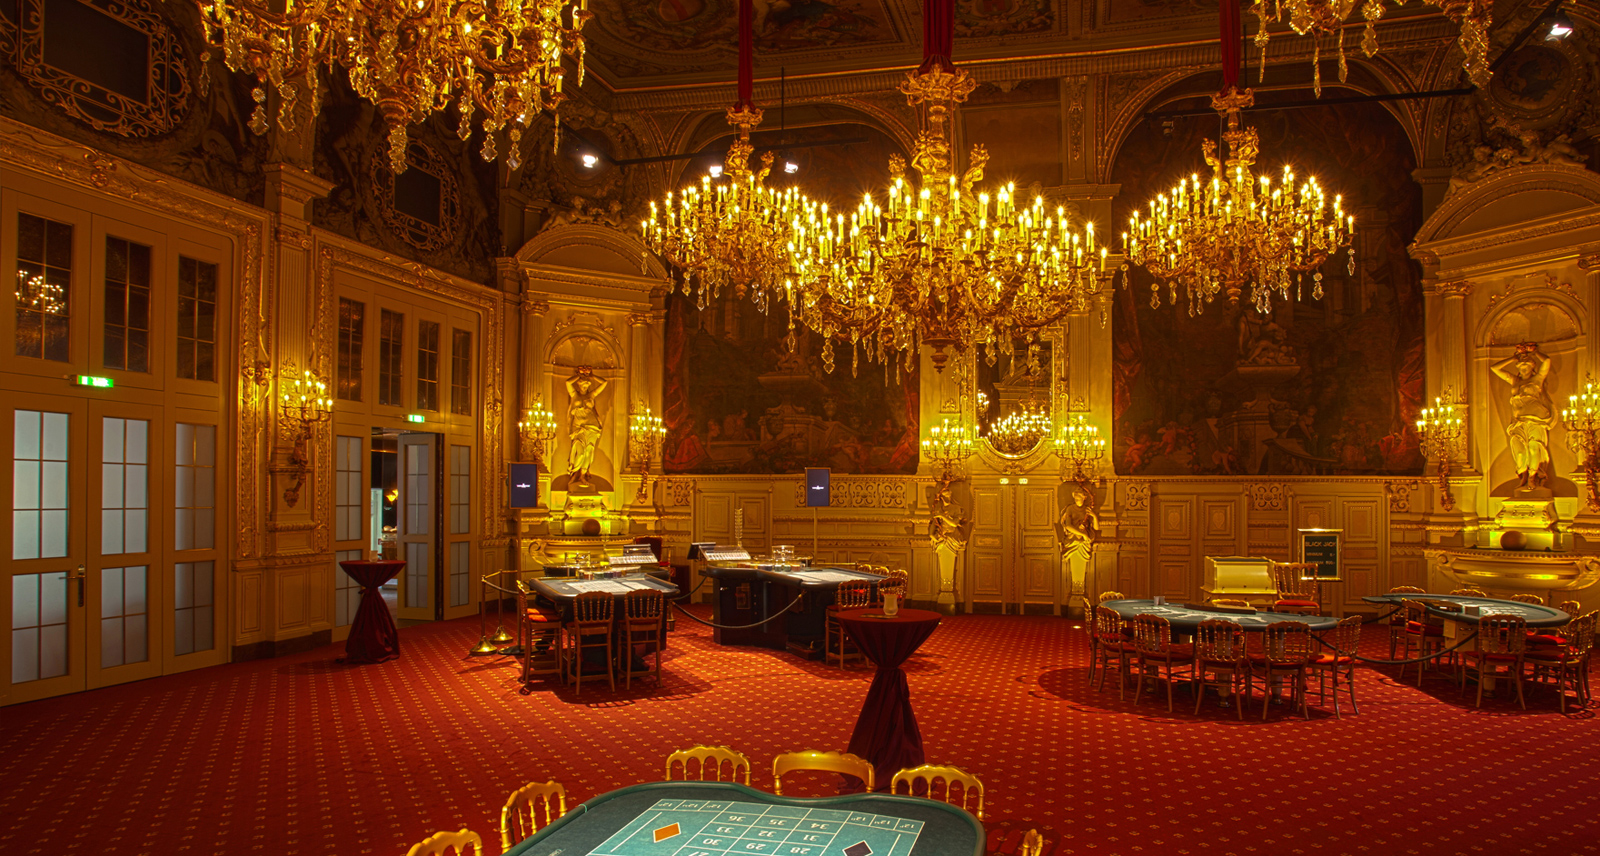 The Casino, in the Kurhaus, is one of the oldest in Germany and probably, as Marlene Dietrich said